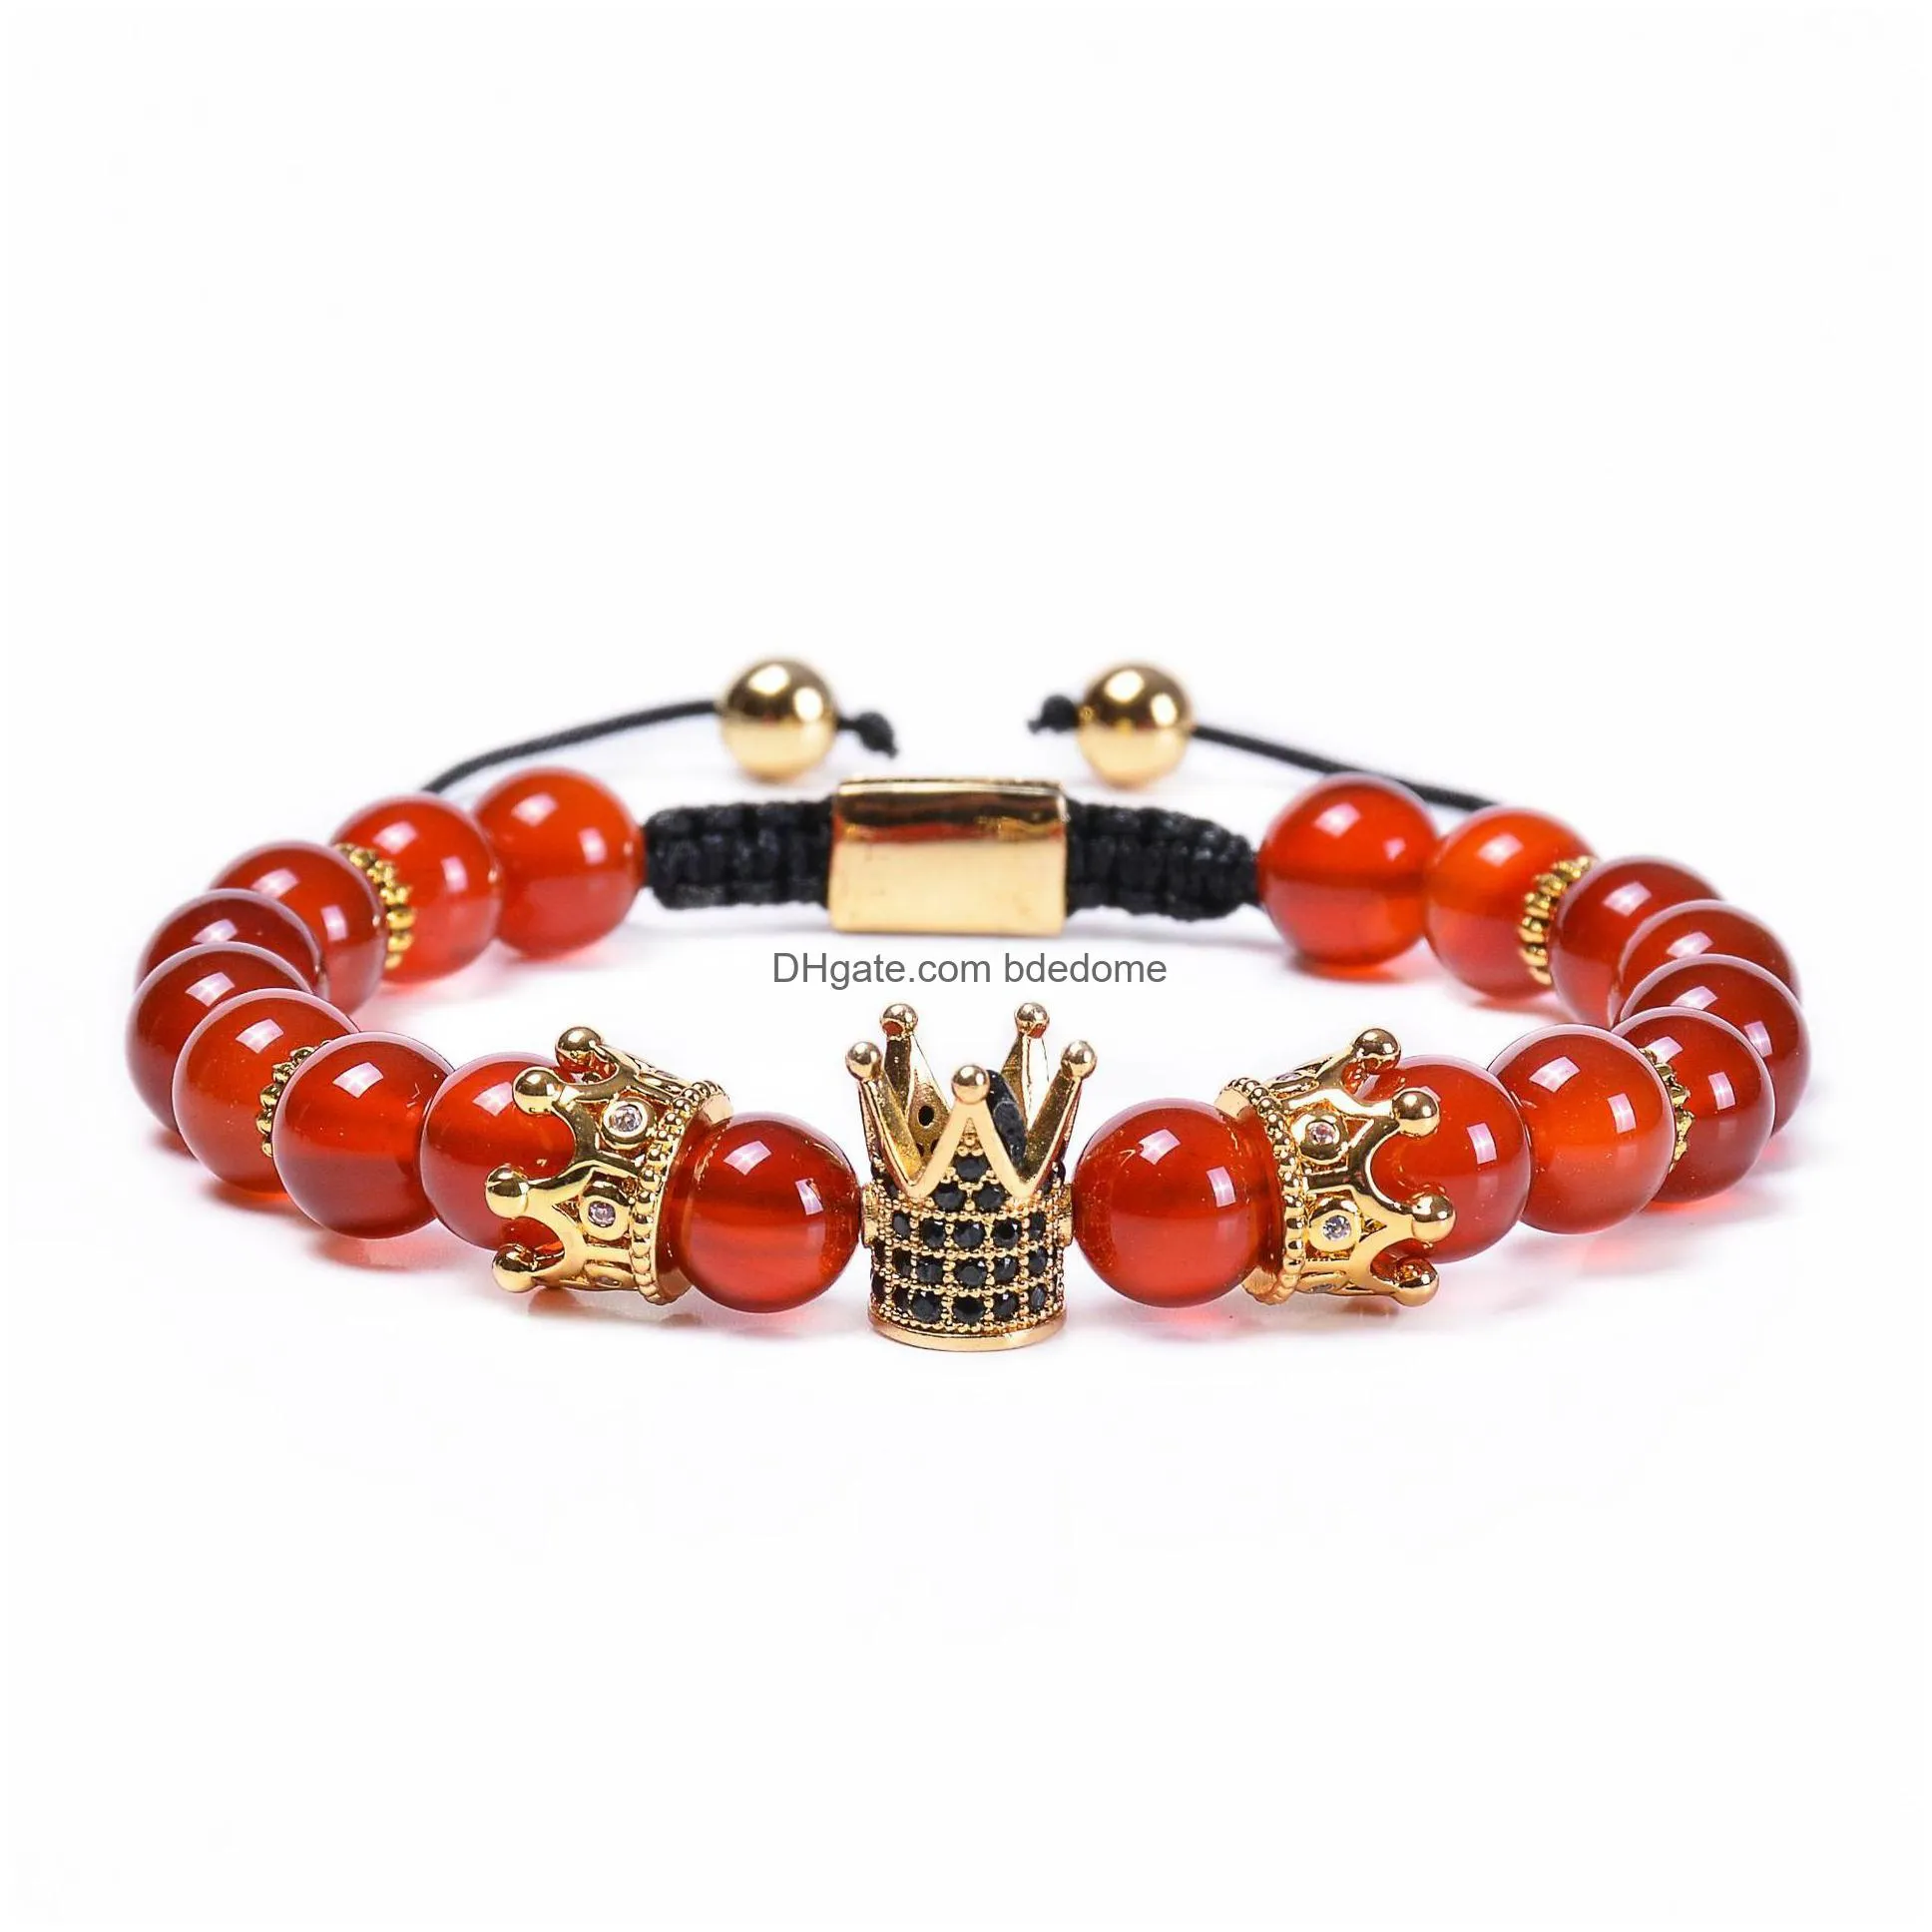 copper micro-inlaid zircon crown bracelets braided natural stone red agate bracelet bead adjustable strand bracelet for women men fashion jewelry will and